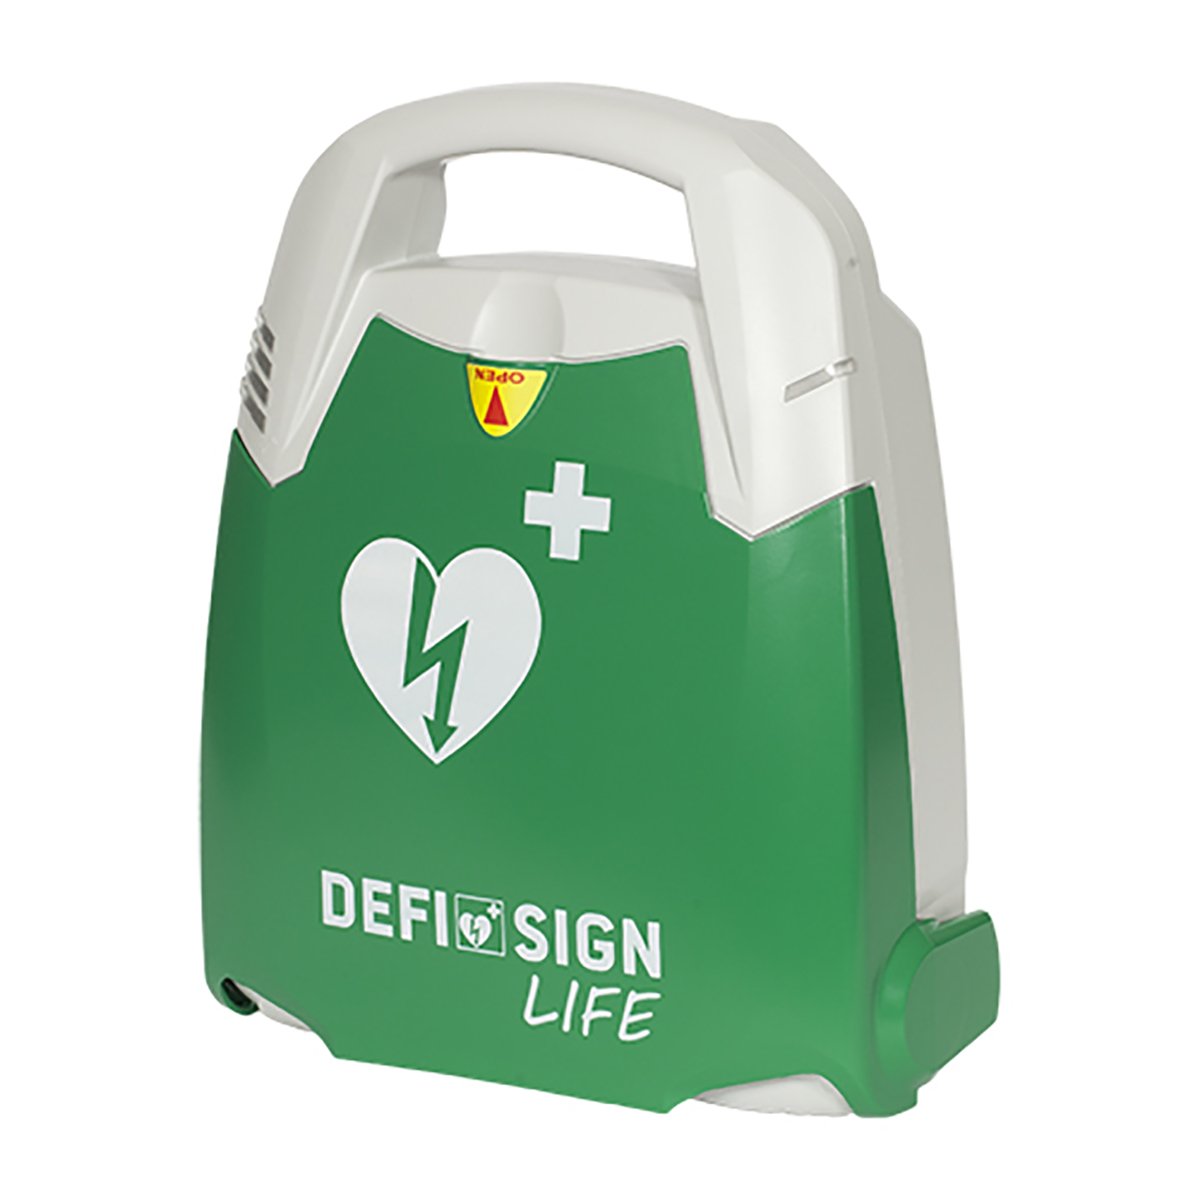 DefiSign Life Fully Automatic Defibrillator